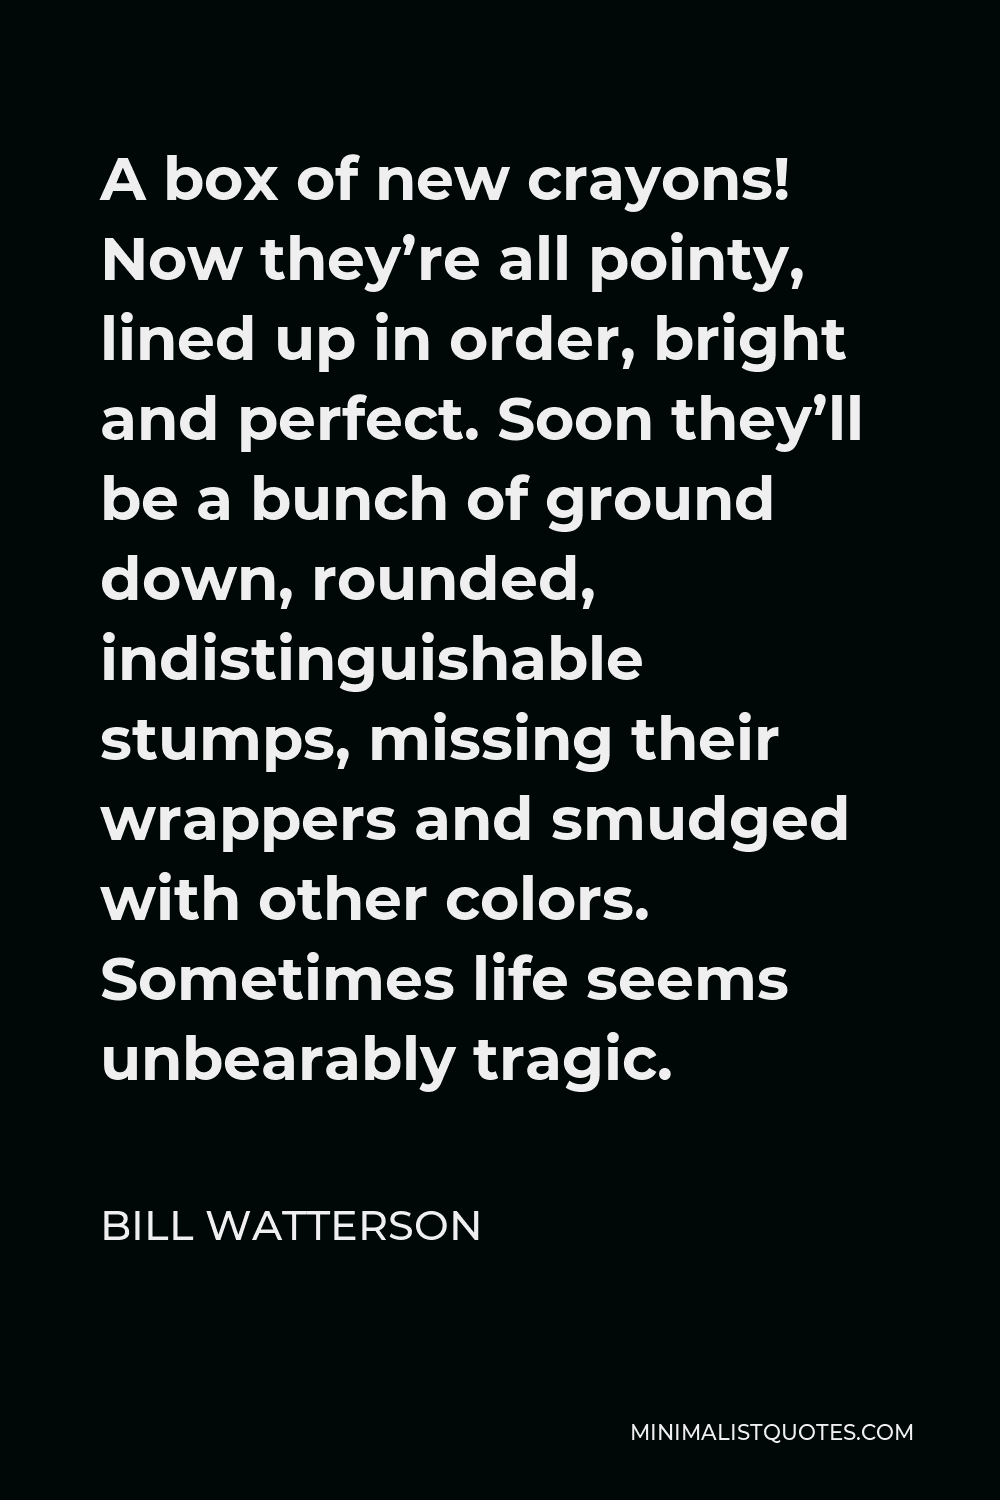 Bill Watterson Quote - A box of new crayons! Now they’re all pointy, lined up in order, bright and perfect. Soon they’ll be a bunch of ground down, rounded, indistinguishable stumps, missing their wrappers and smudged with other colors. Sometimes life seems unbearably tragic.